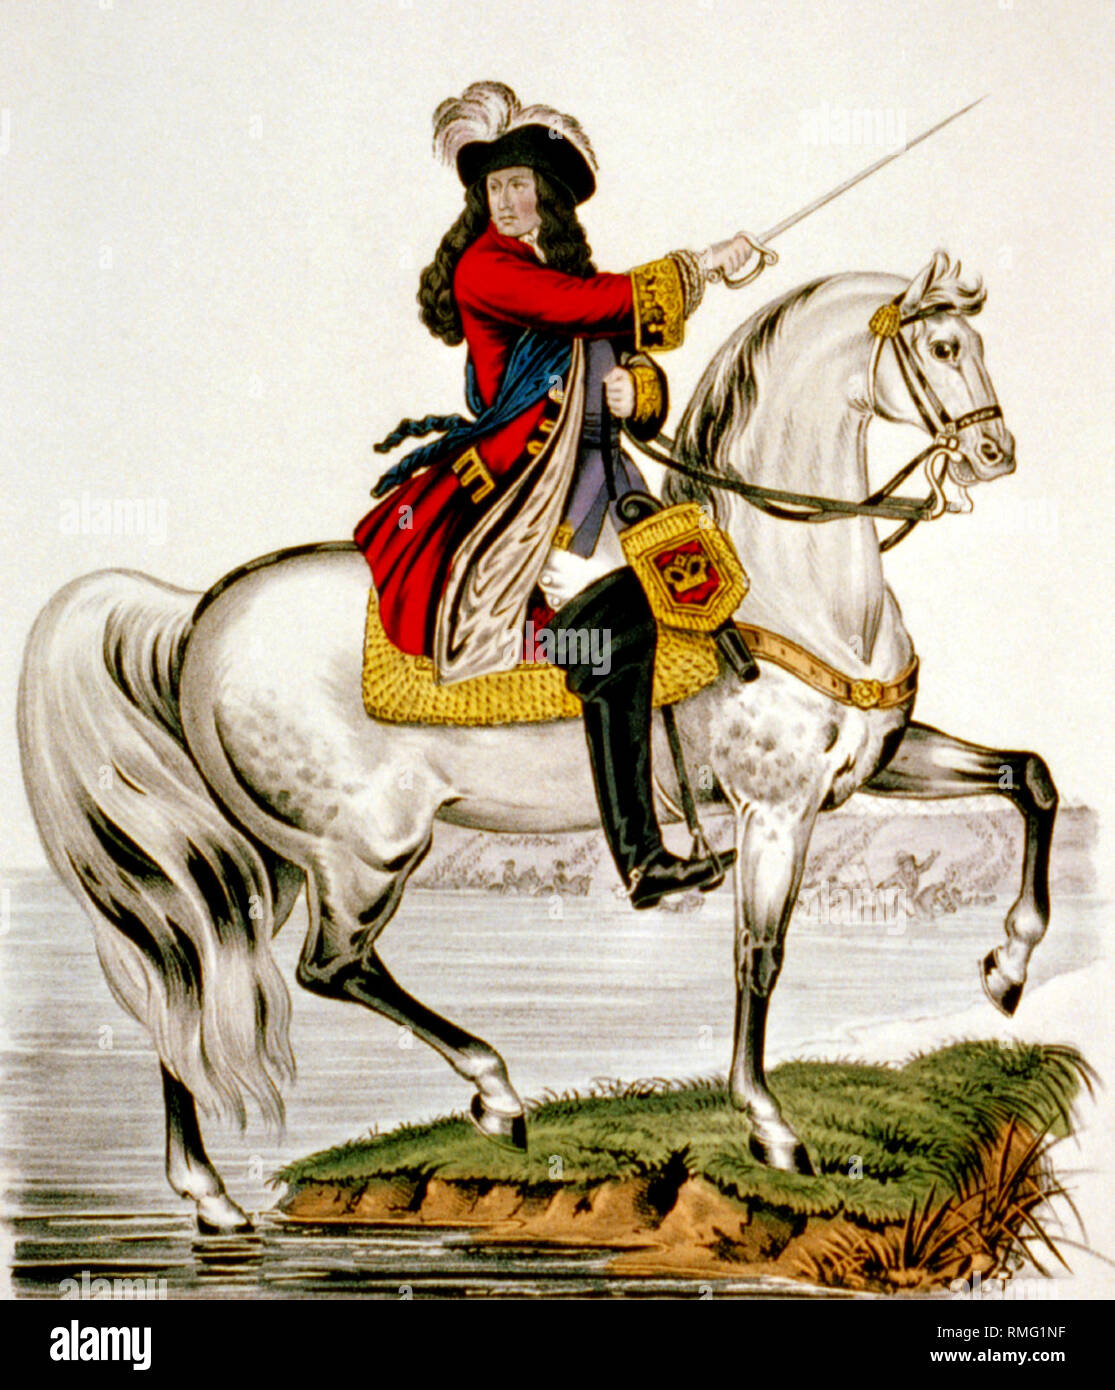 King Billy, king william III of orange crossing the boyne on his white horse at the battle of the boyne 1st july 1690  Image updated using digital restoration and retouching techniques Stock Photo